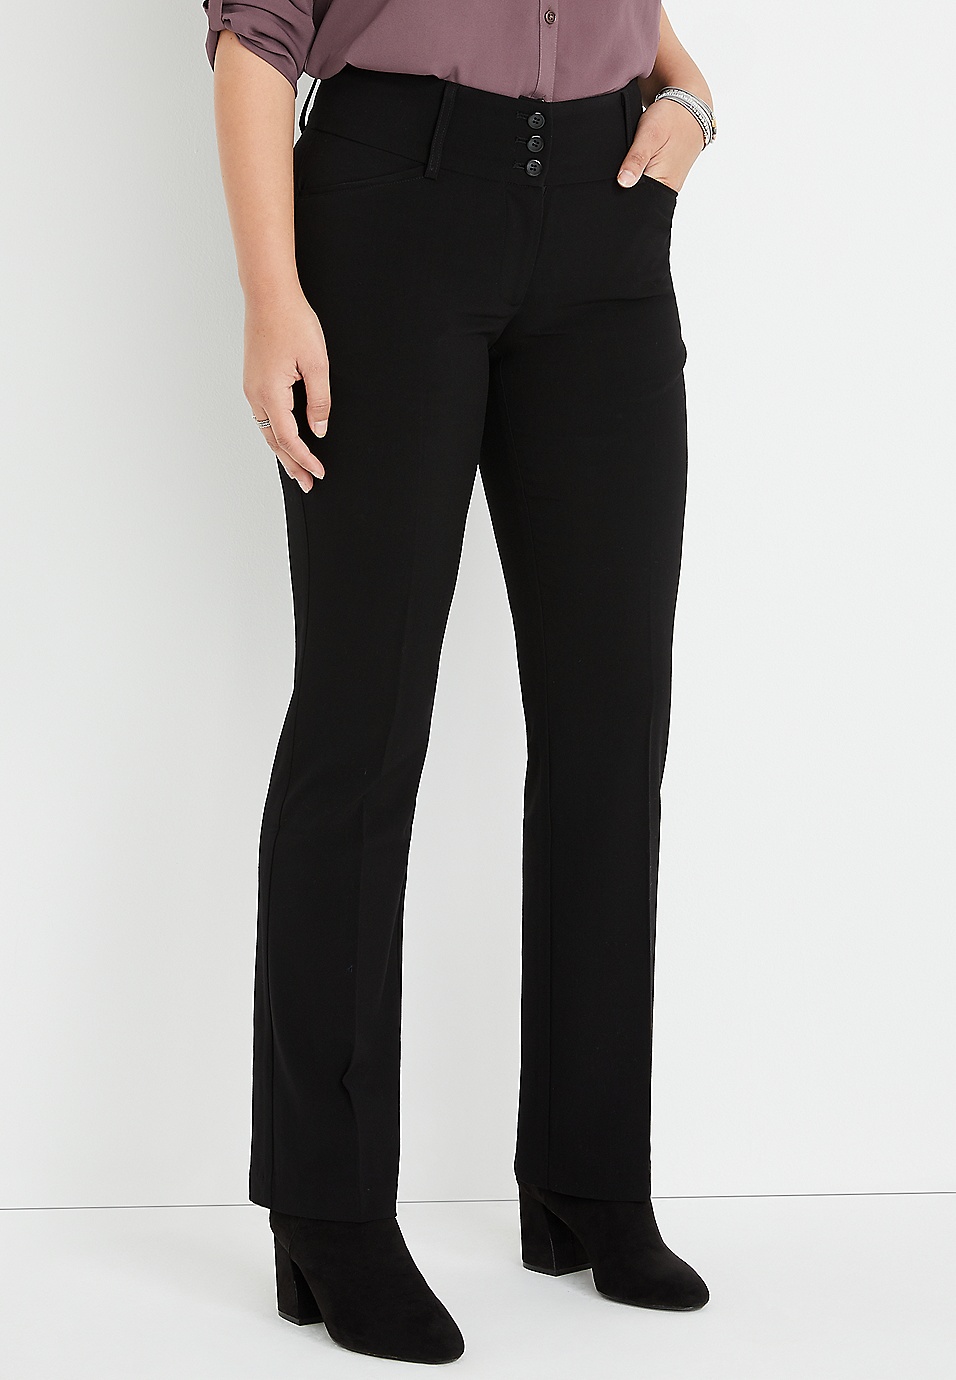 Boot Cut Leg Style Trousers - Black - Just $7